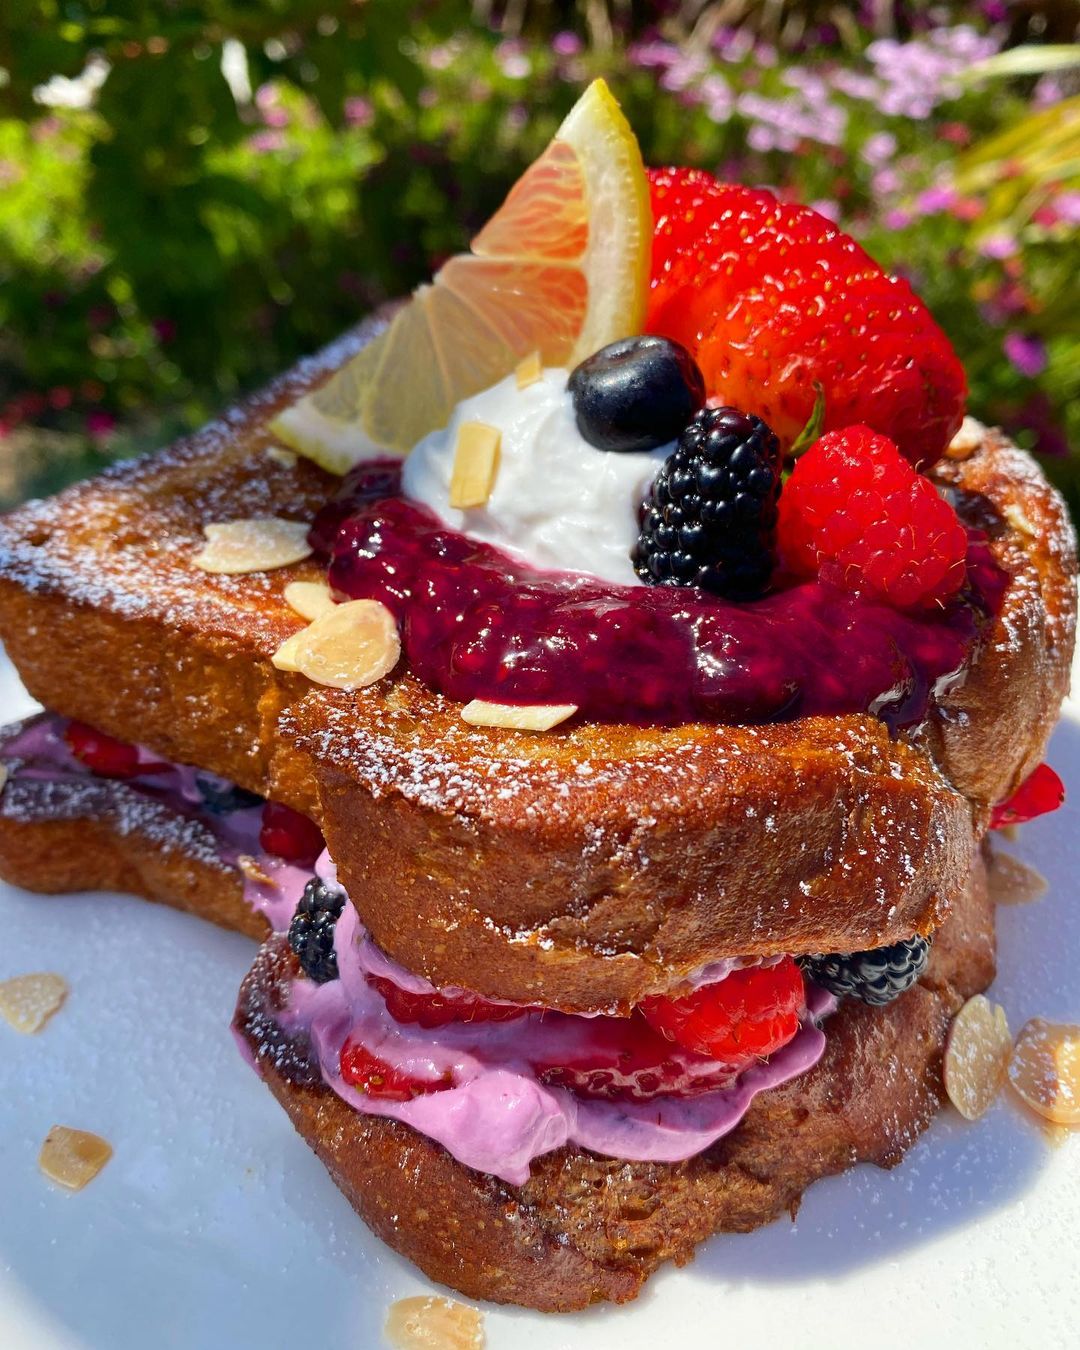 Vegan French toast from The Wild Chive